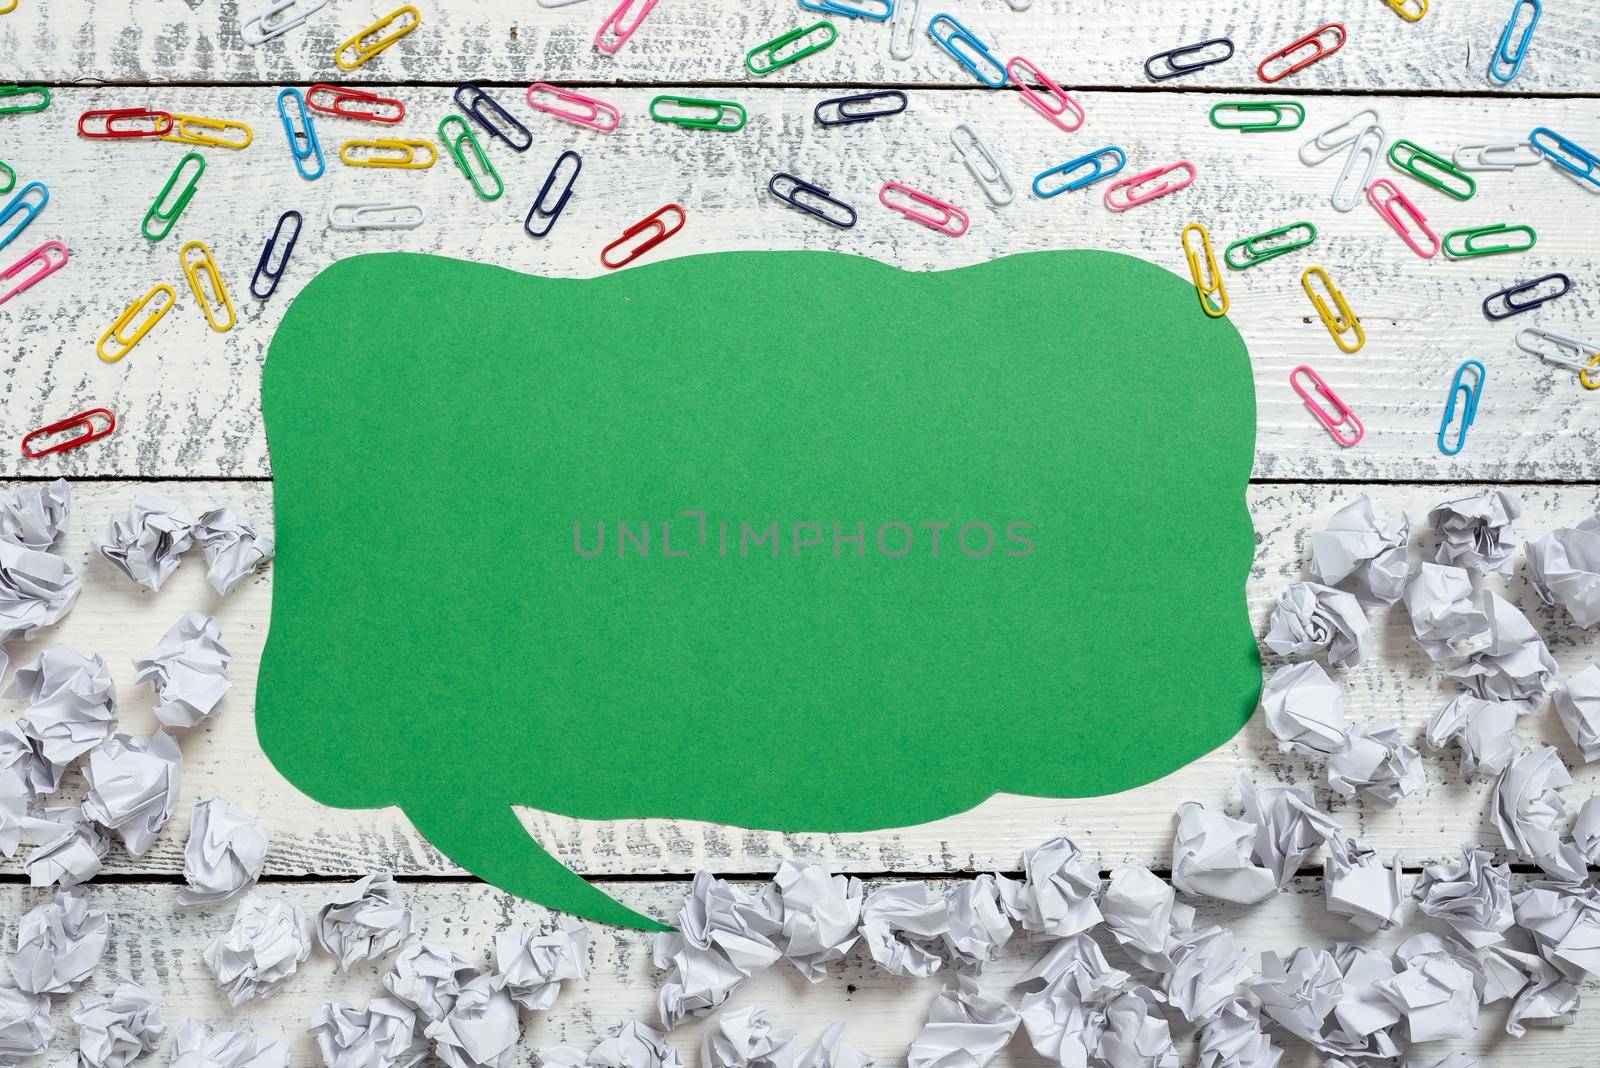 Speech Bubble With New Idea Divided On Half With Paper Wraps And Paperclips